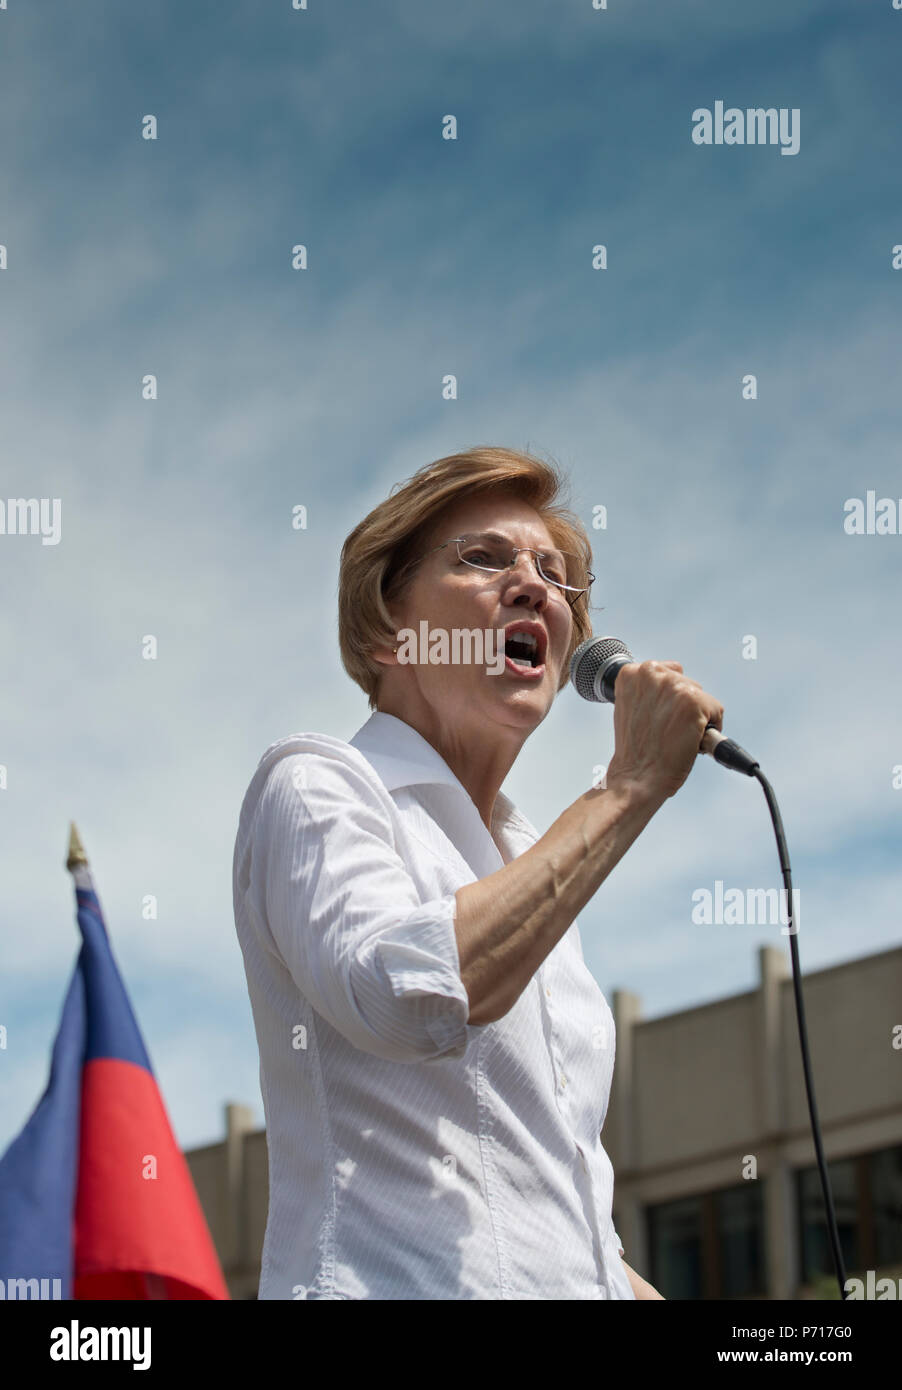 U.S. Senator Elizabeth Warren (Democrat Massachusetts) speaks to thousands from the back of a truck at Boston City Hall during the Rally against Family Separation in Boston, MA.  Large rallies against U.S. President Trump’s policy of separating immigrant families took place in more than 750 U.S. cities on June 30th of 2018. Stock Photo